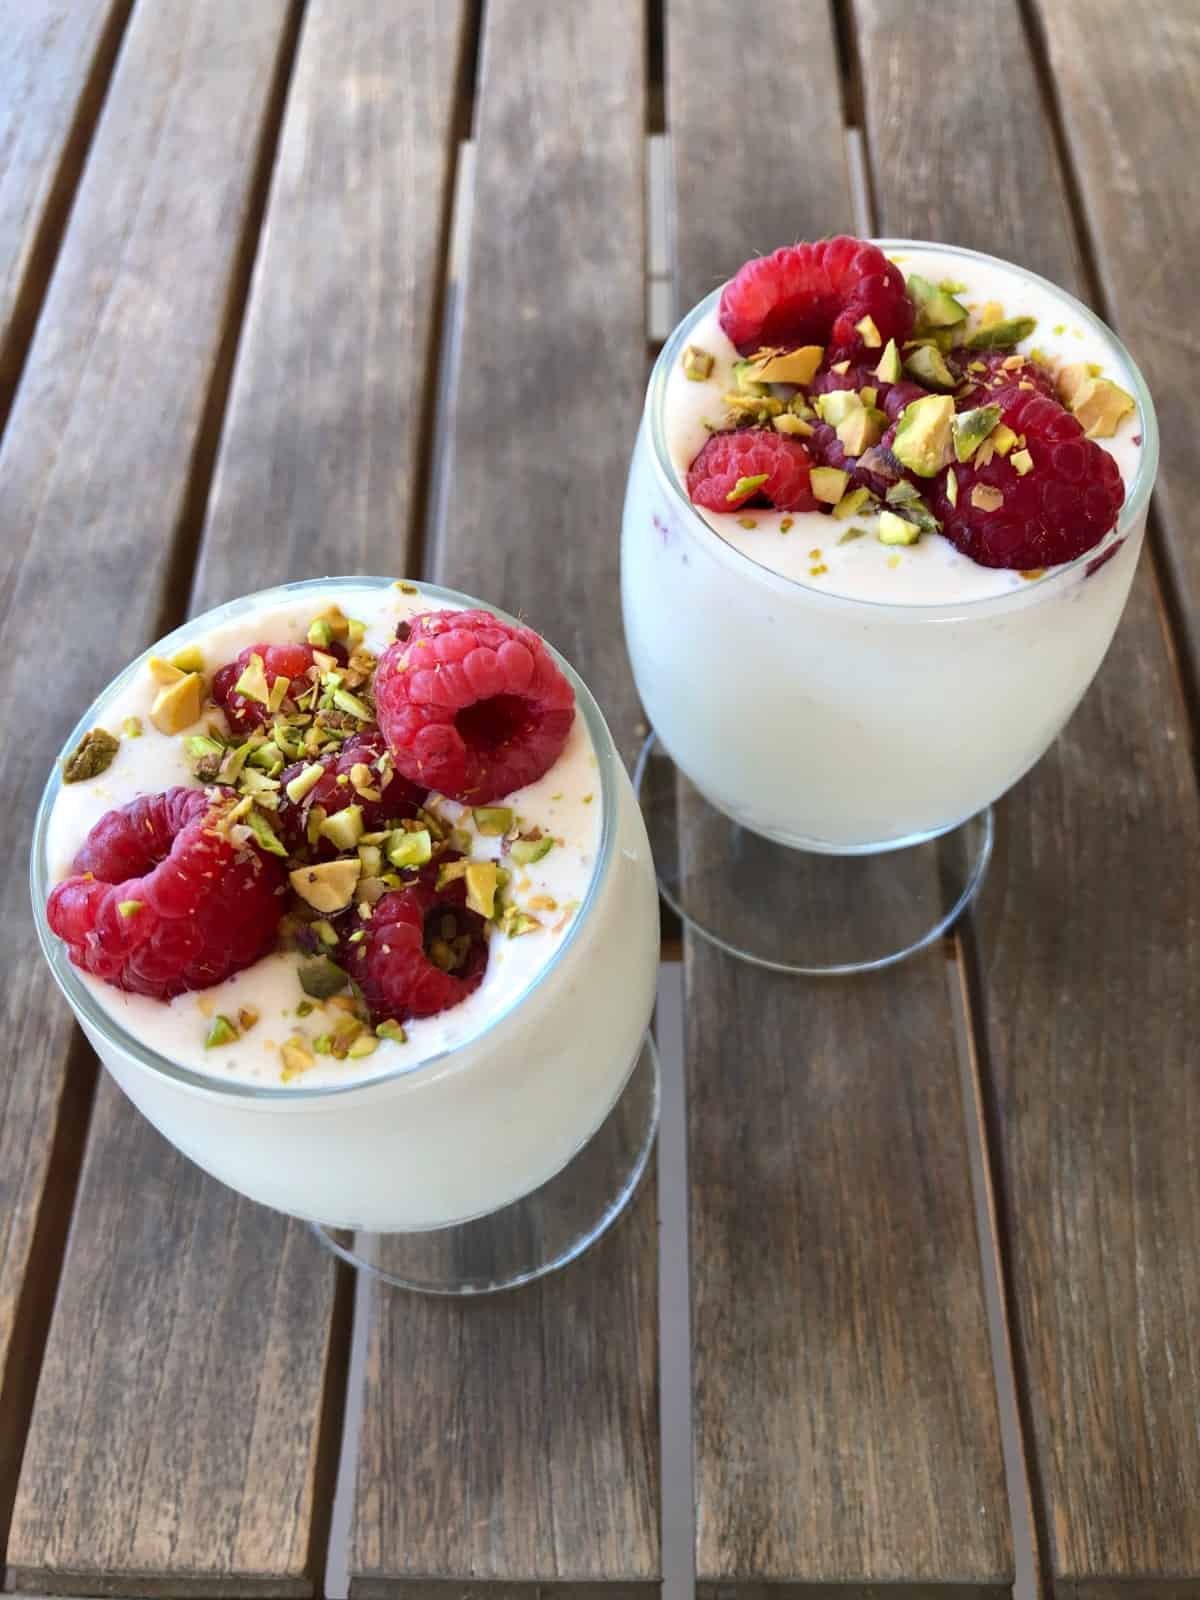 No-bake cheese cake cups topped with fresh raspberries and chopped pistachios.